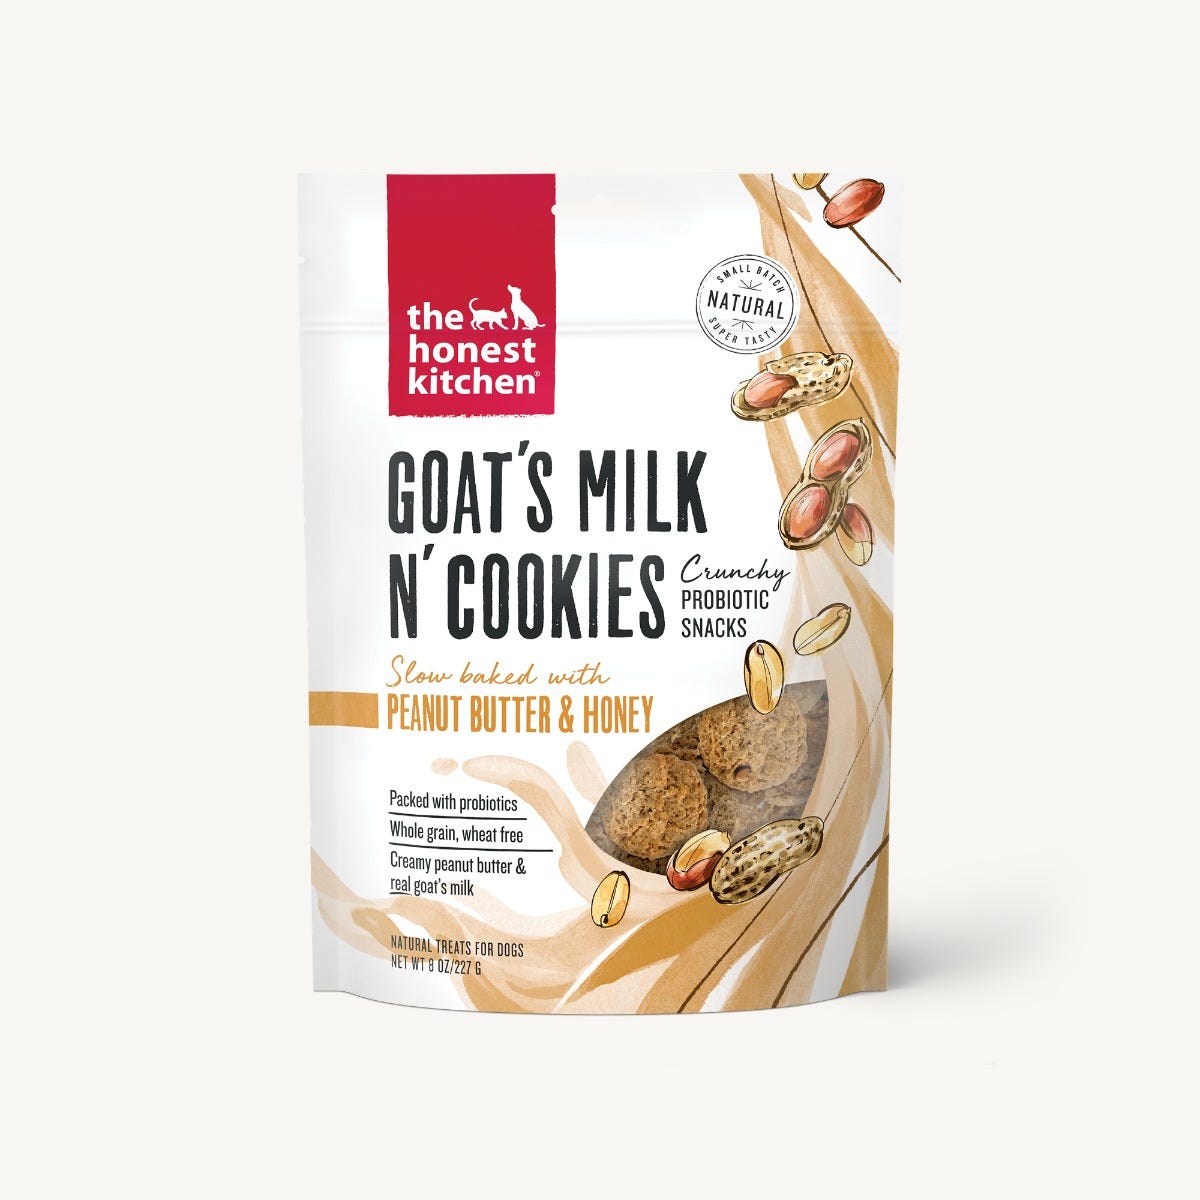 The Honest Kitchen Goat's Milk N' Cookies - Slow Baked with Peanut Butter & Honey, 8 oz